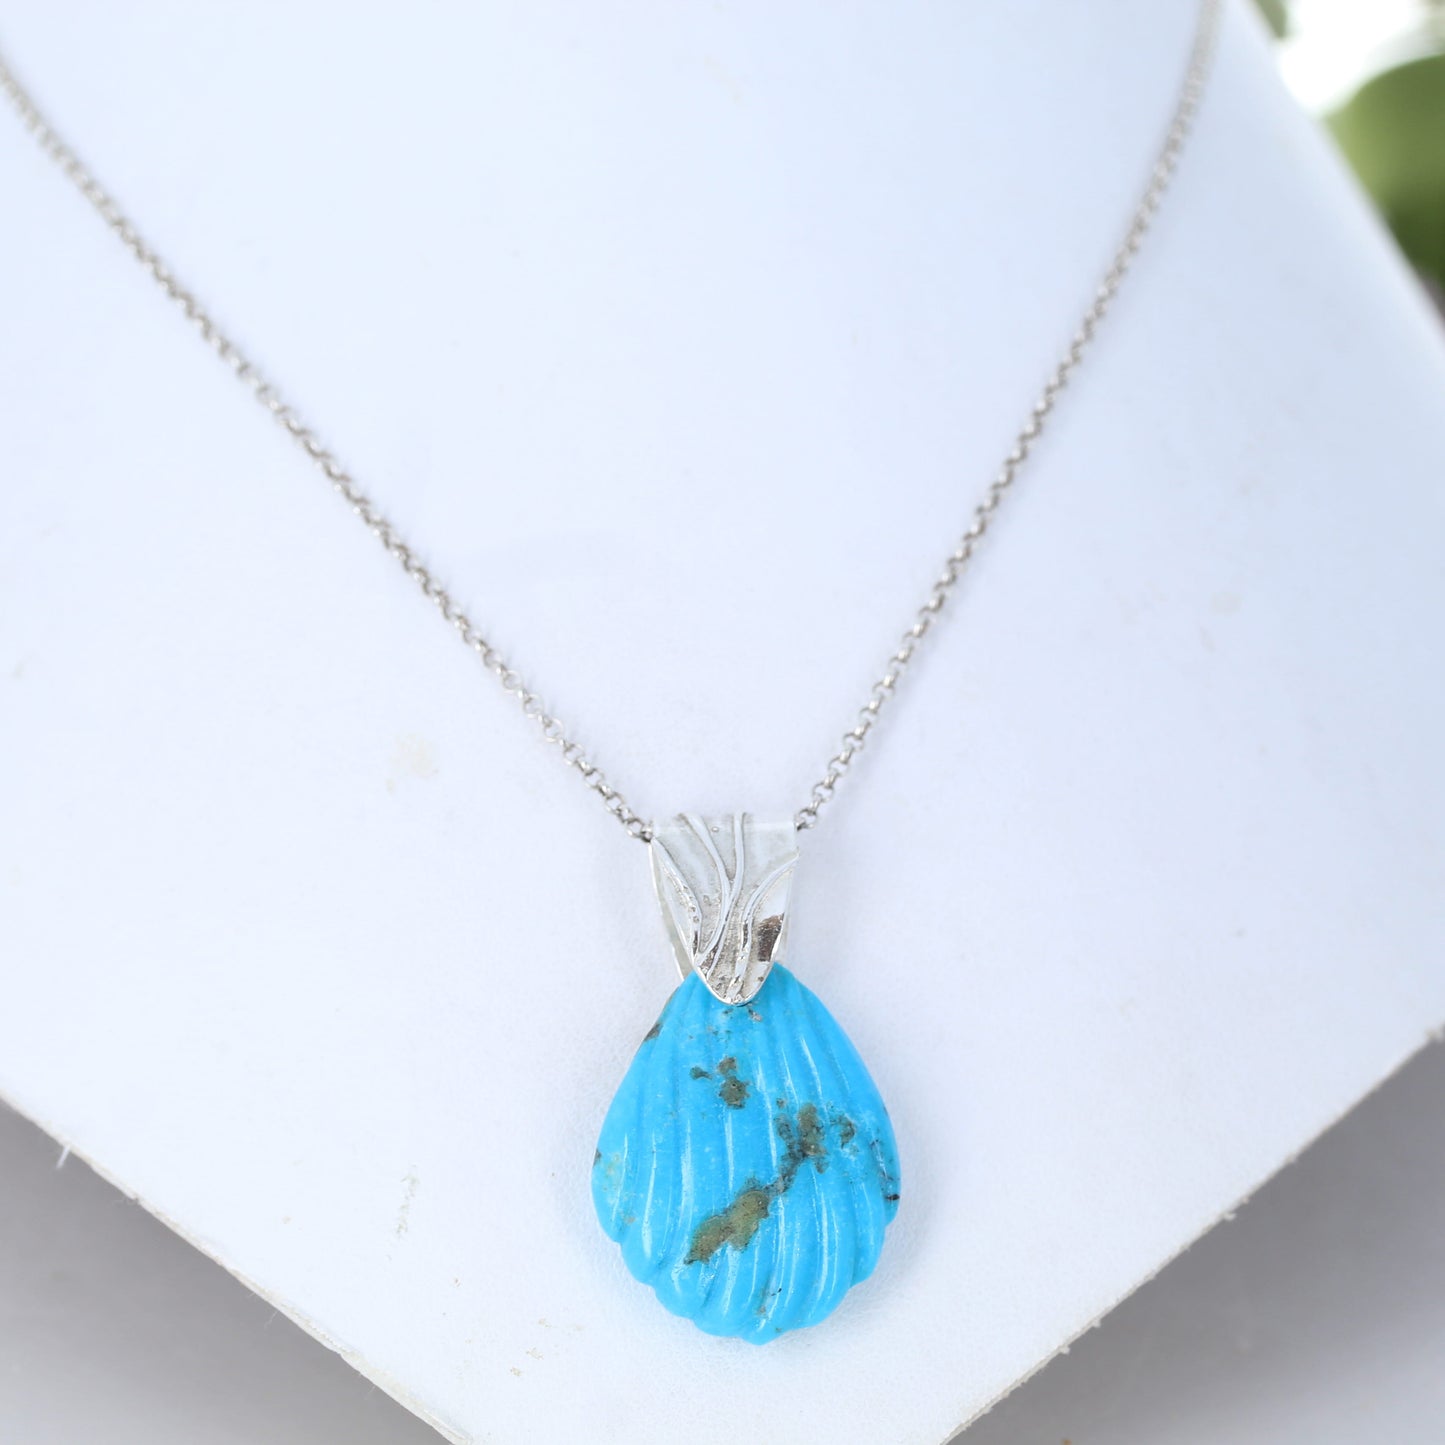 Exquisite Blue Turquoise Shell Pendant Sterling Silver Bail